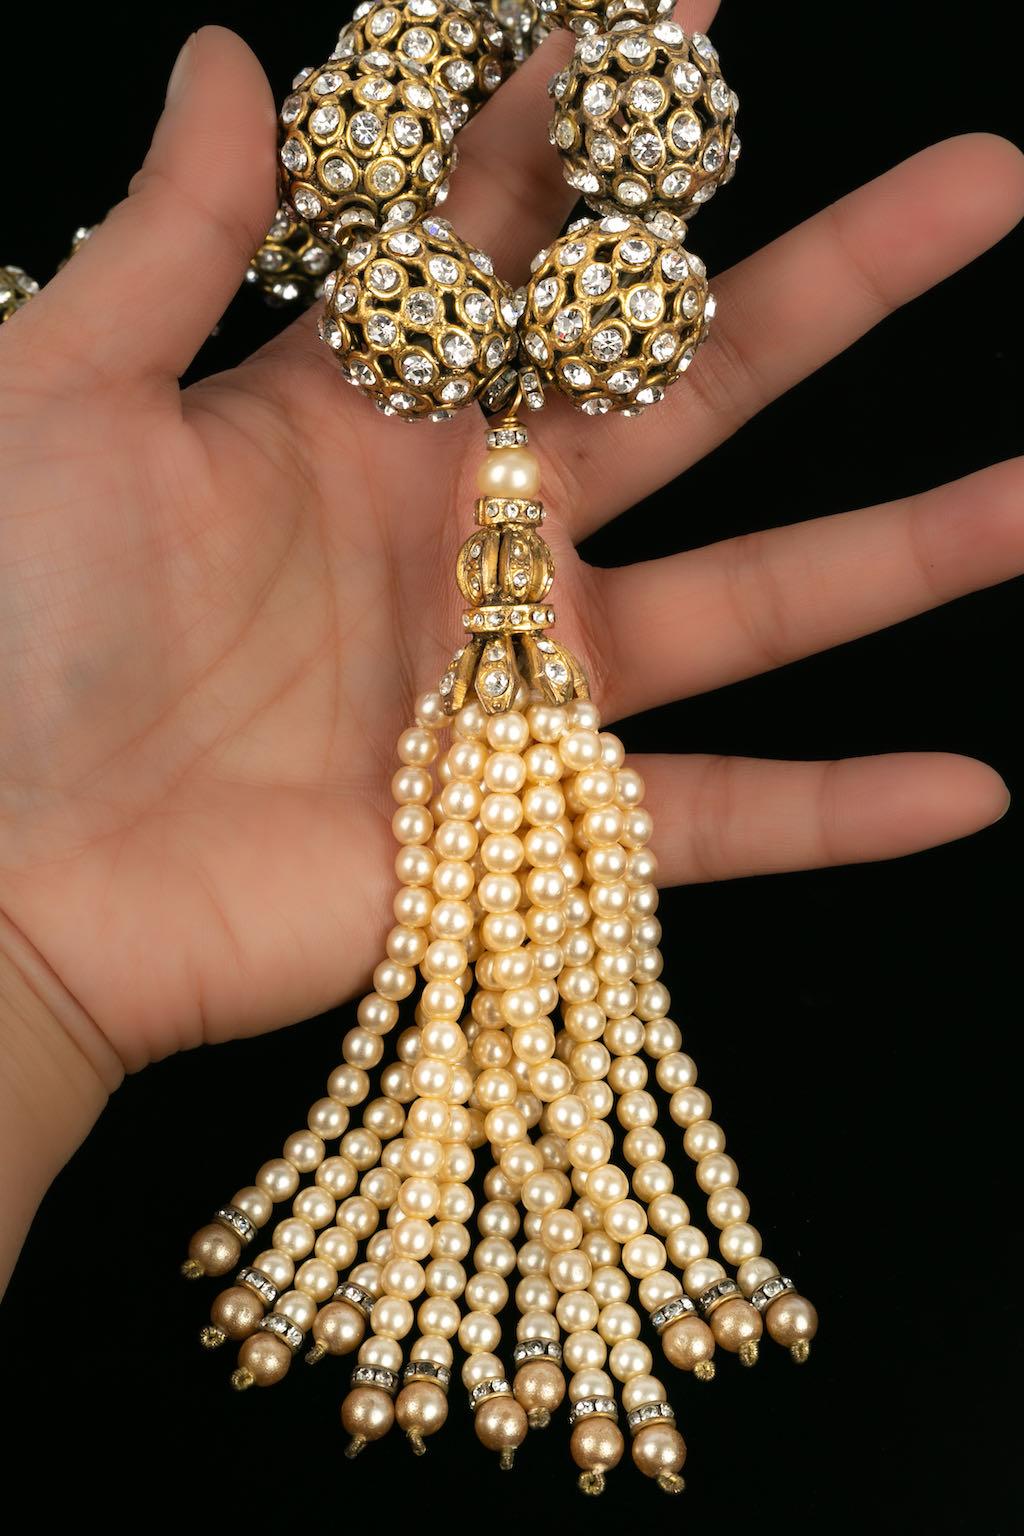 Chanel Short Necklace in Gold Metal Beads Paved with Rhinestones For Sale 6